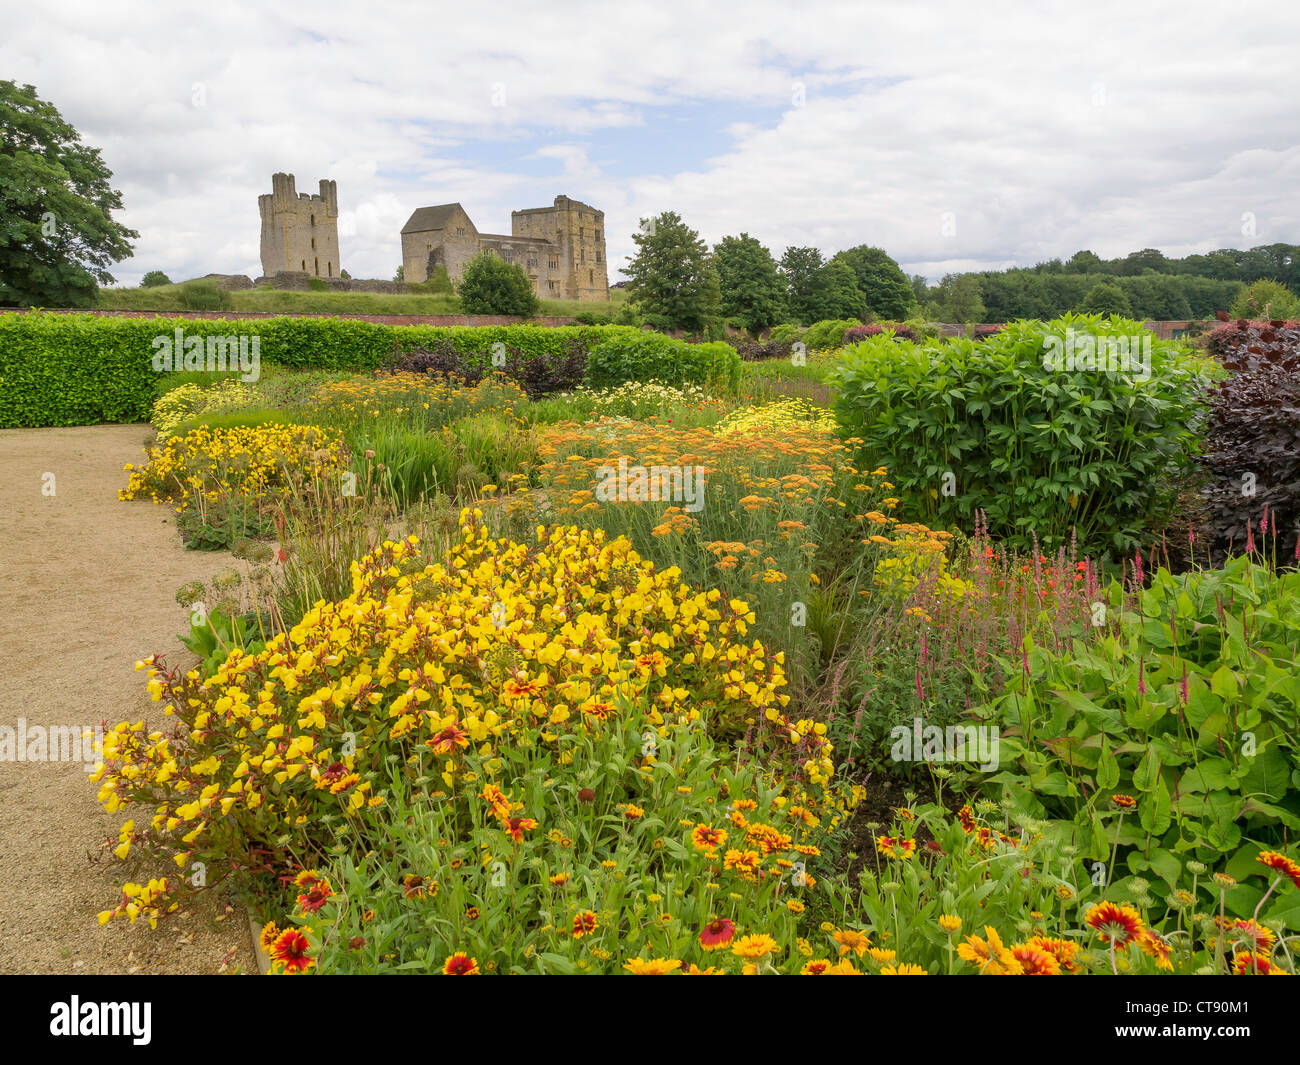 Helmsley Castle overlooking the Helmsley Walled Garden with a show of summer flowers Stock Photo